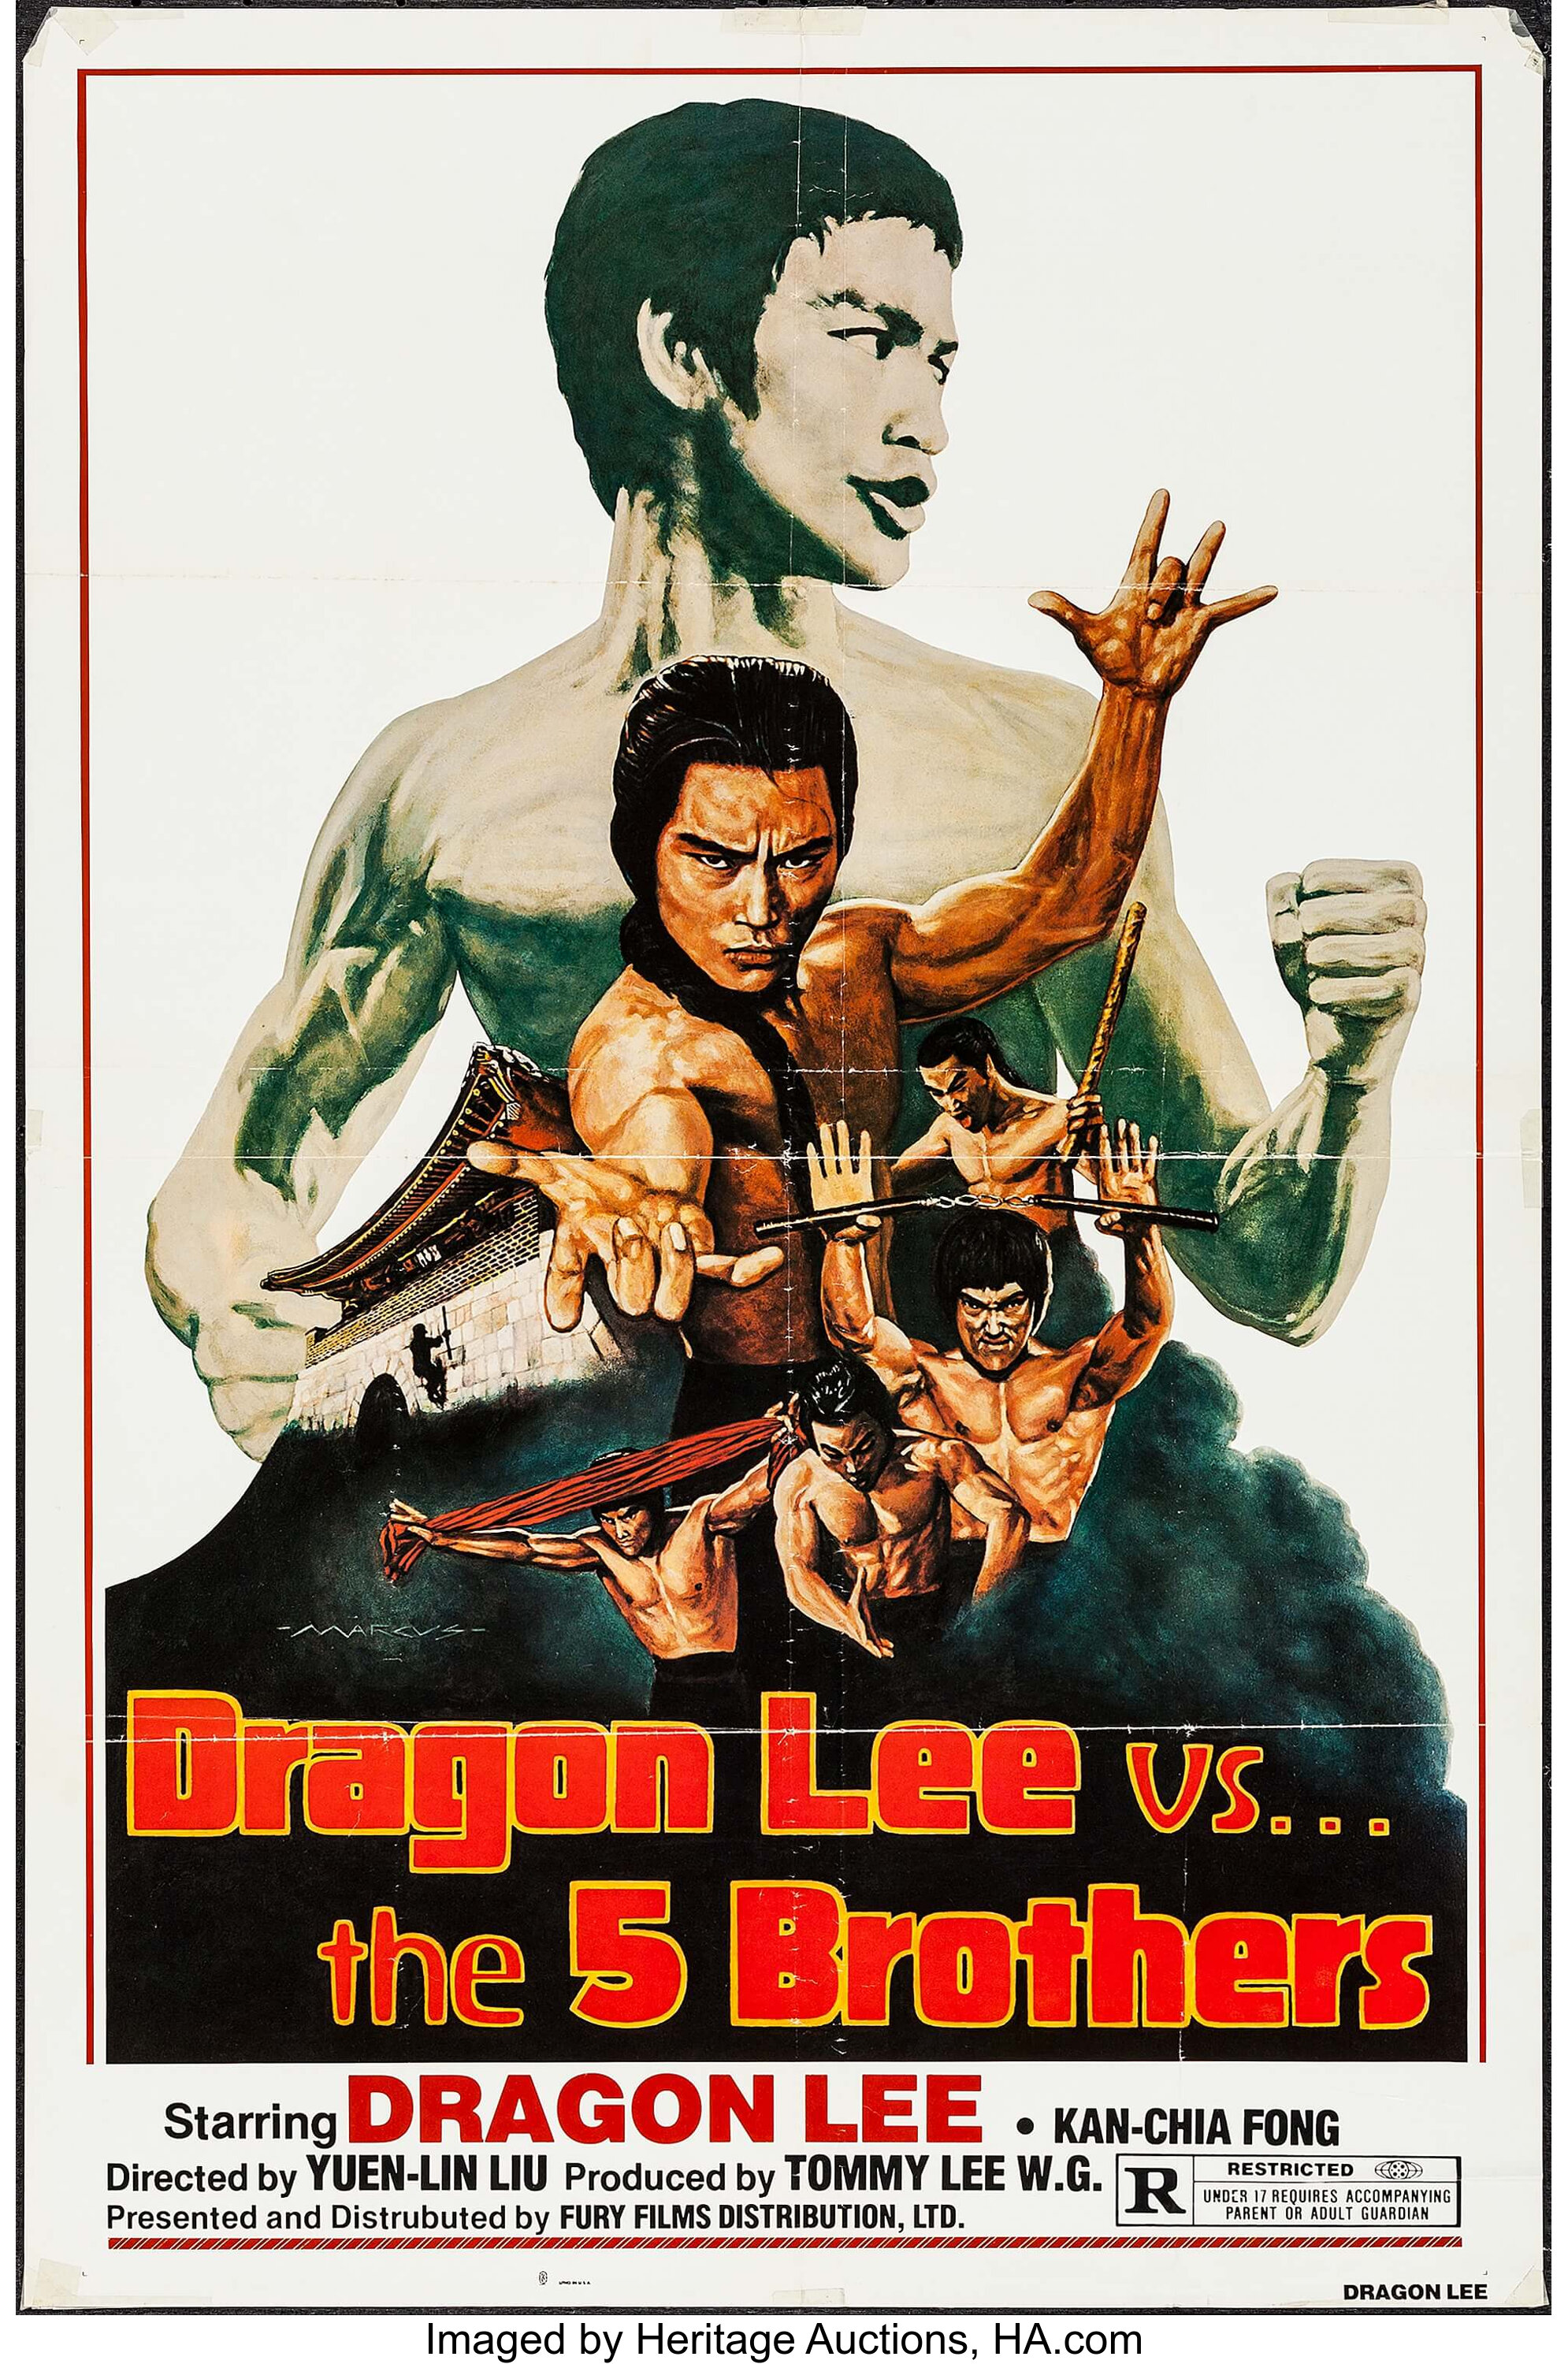 martial arts movie posters